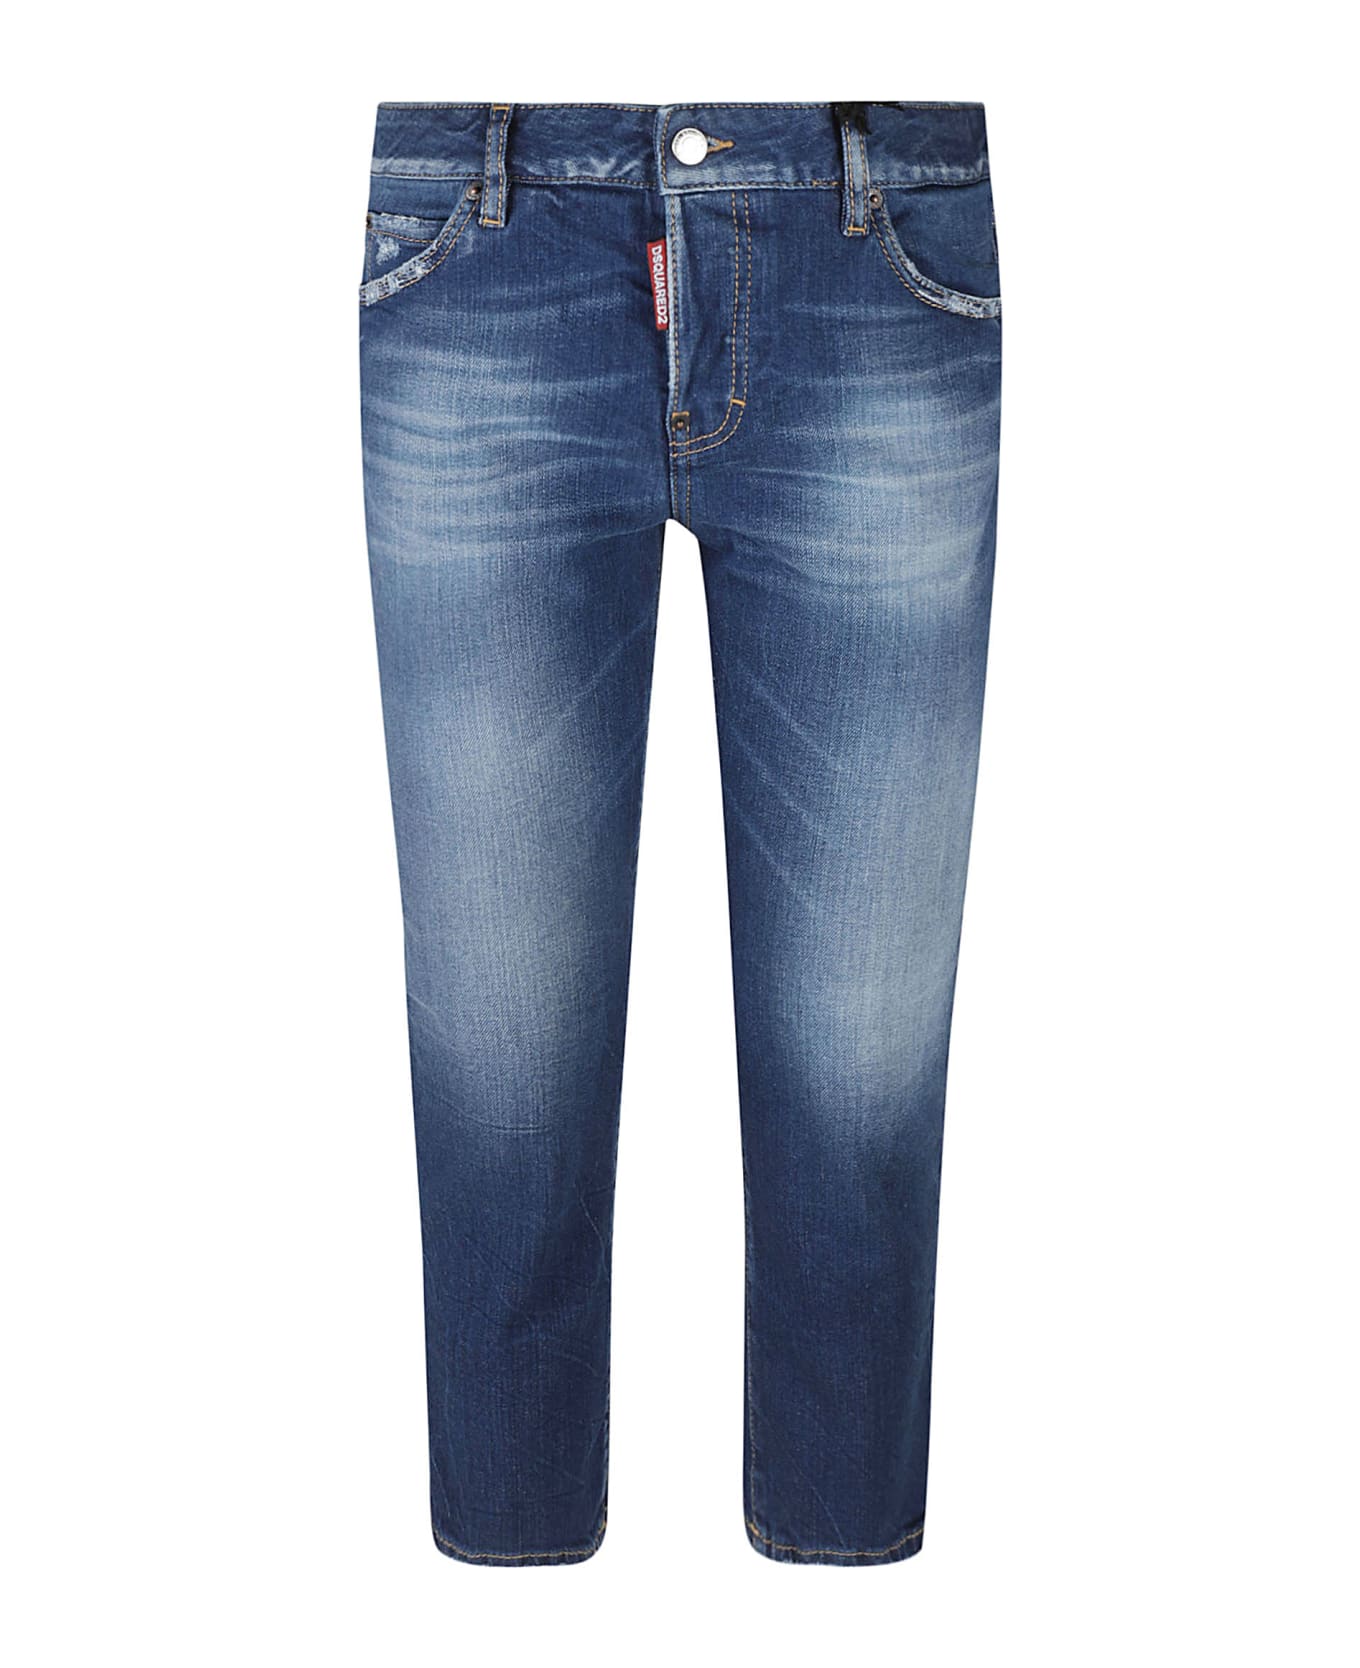 Dsquared2 Cool Girl Cropped Jeans - Navy Blue